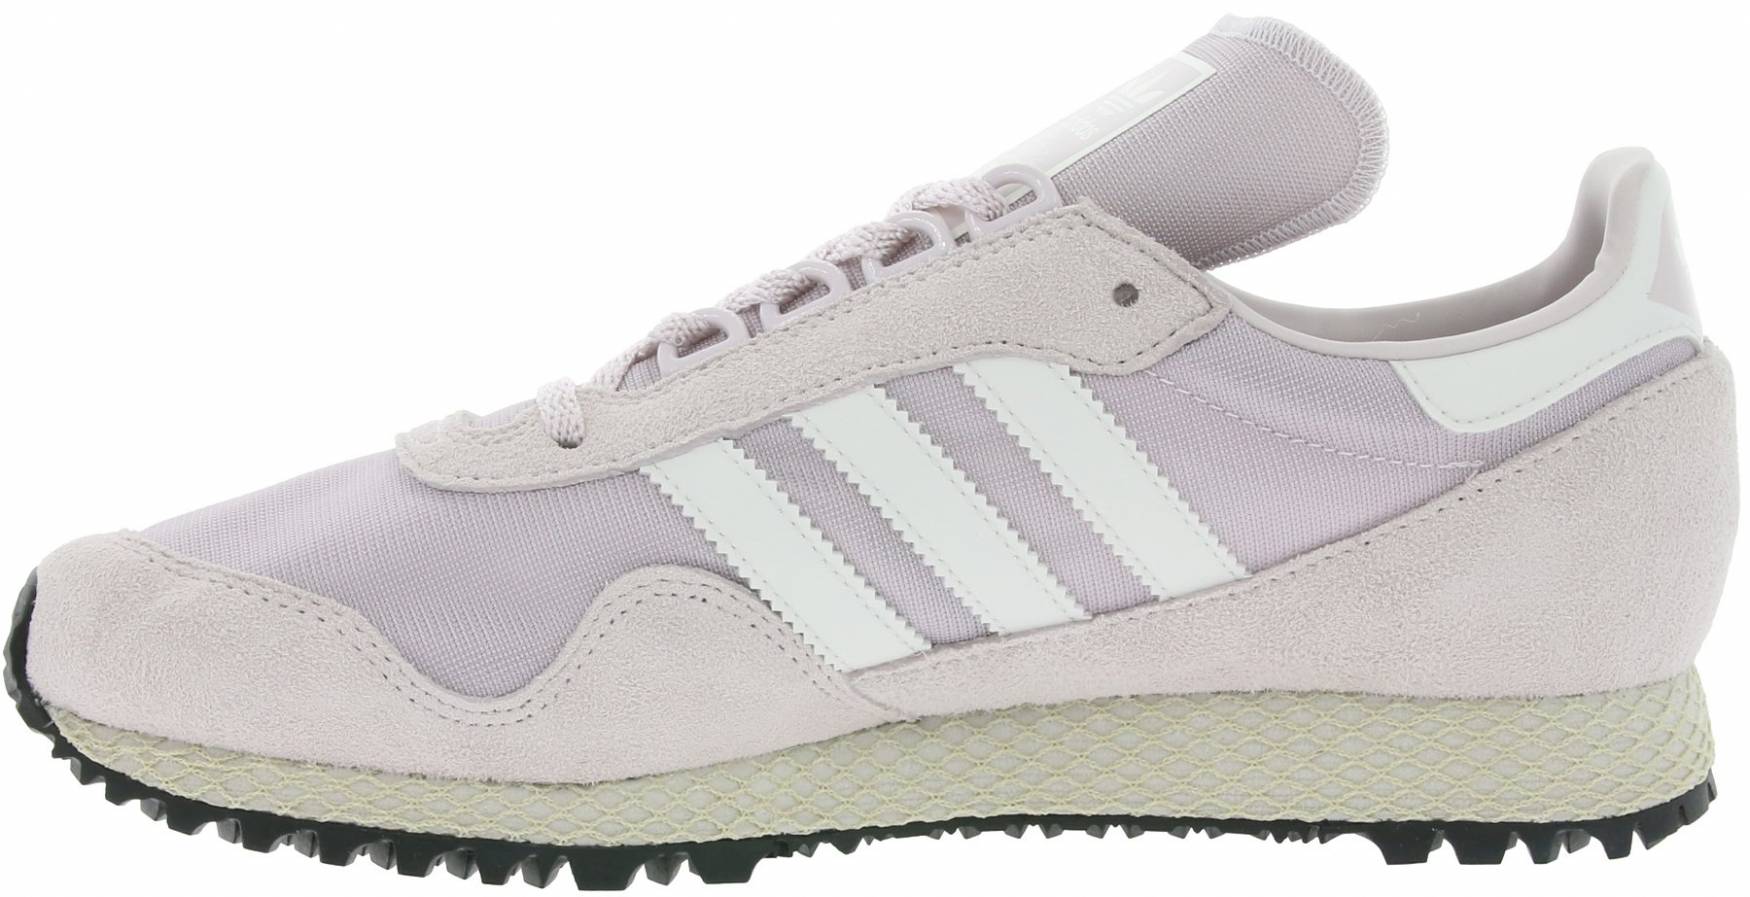 Adidas New York sneakers in pink + grey (only $85) | RunRepeat